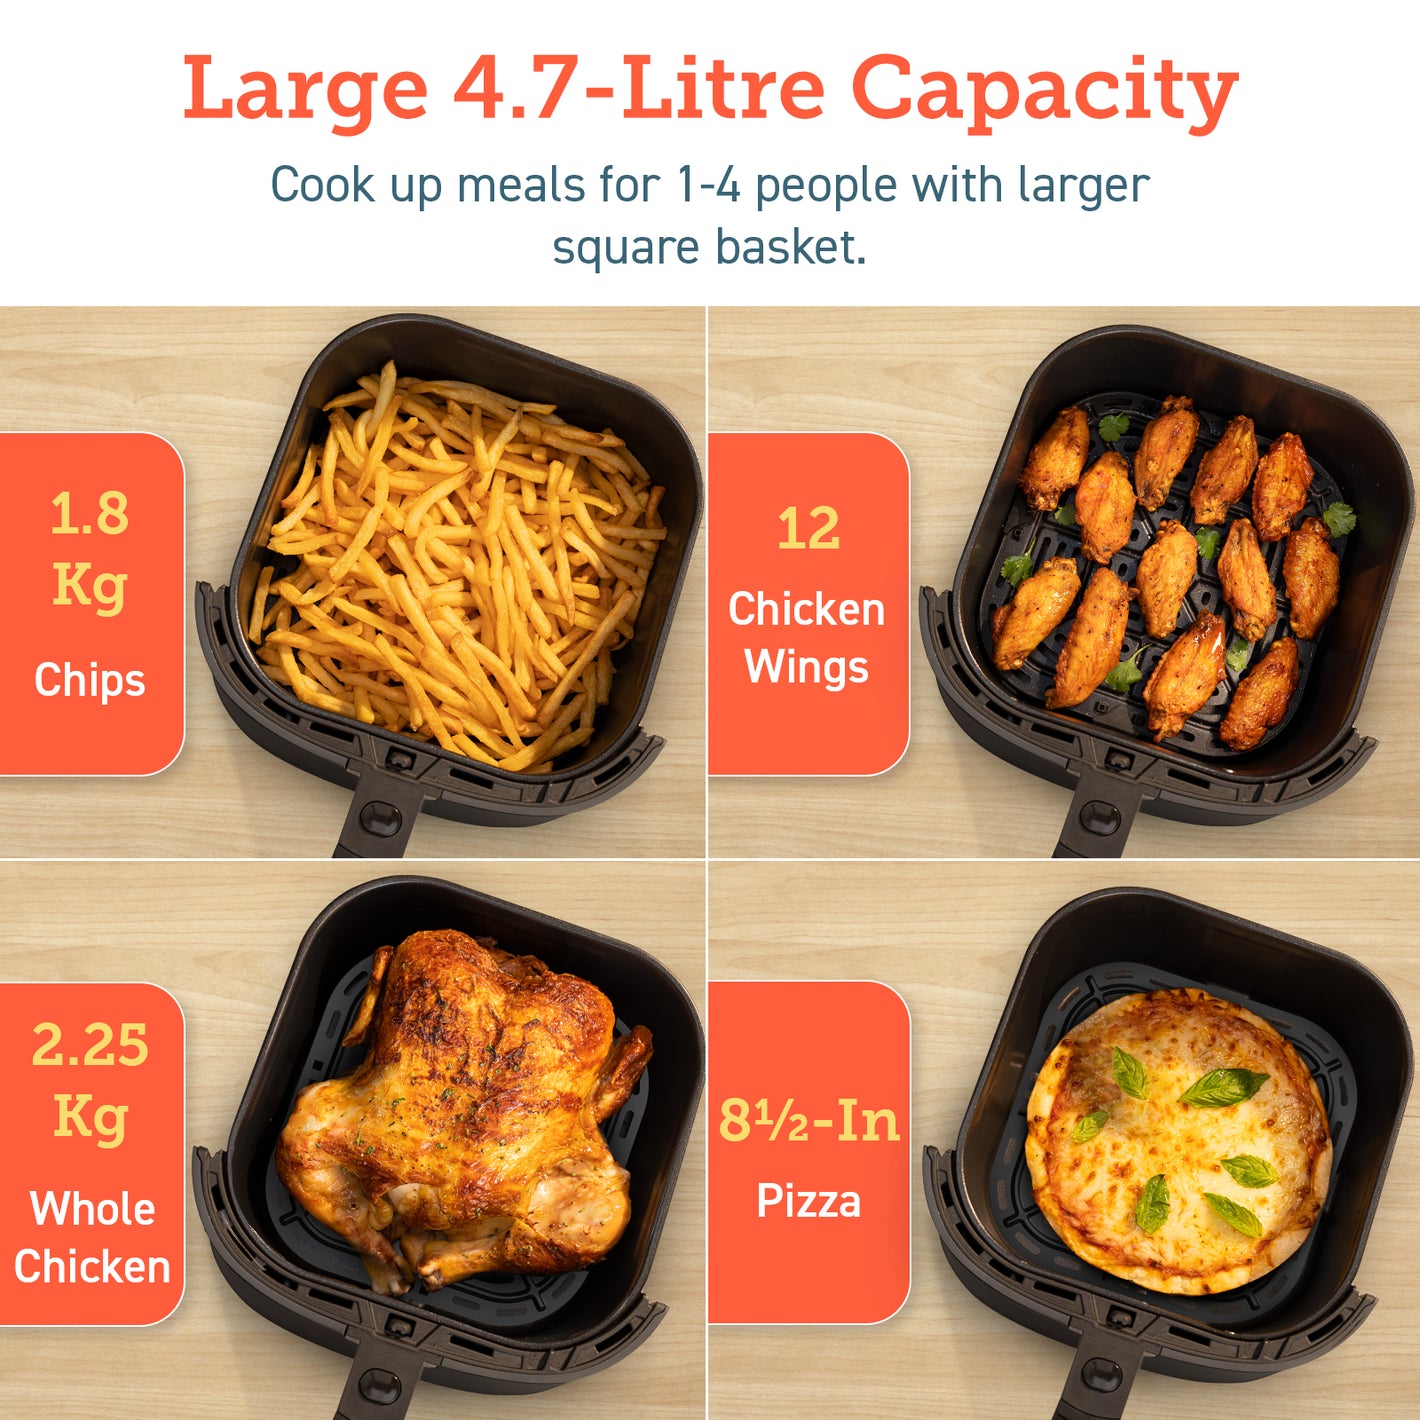 Larger 4.7-Liter Capacity Cook up meals for 1-4 people with larger square basket. 1.8Kg Chips 12Chicken Wings 2.25kg Whole Chicken 8 1/2-In Pizza